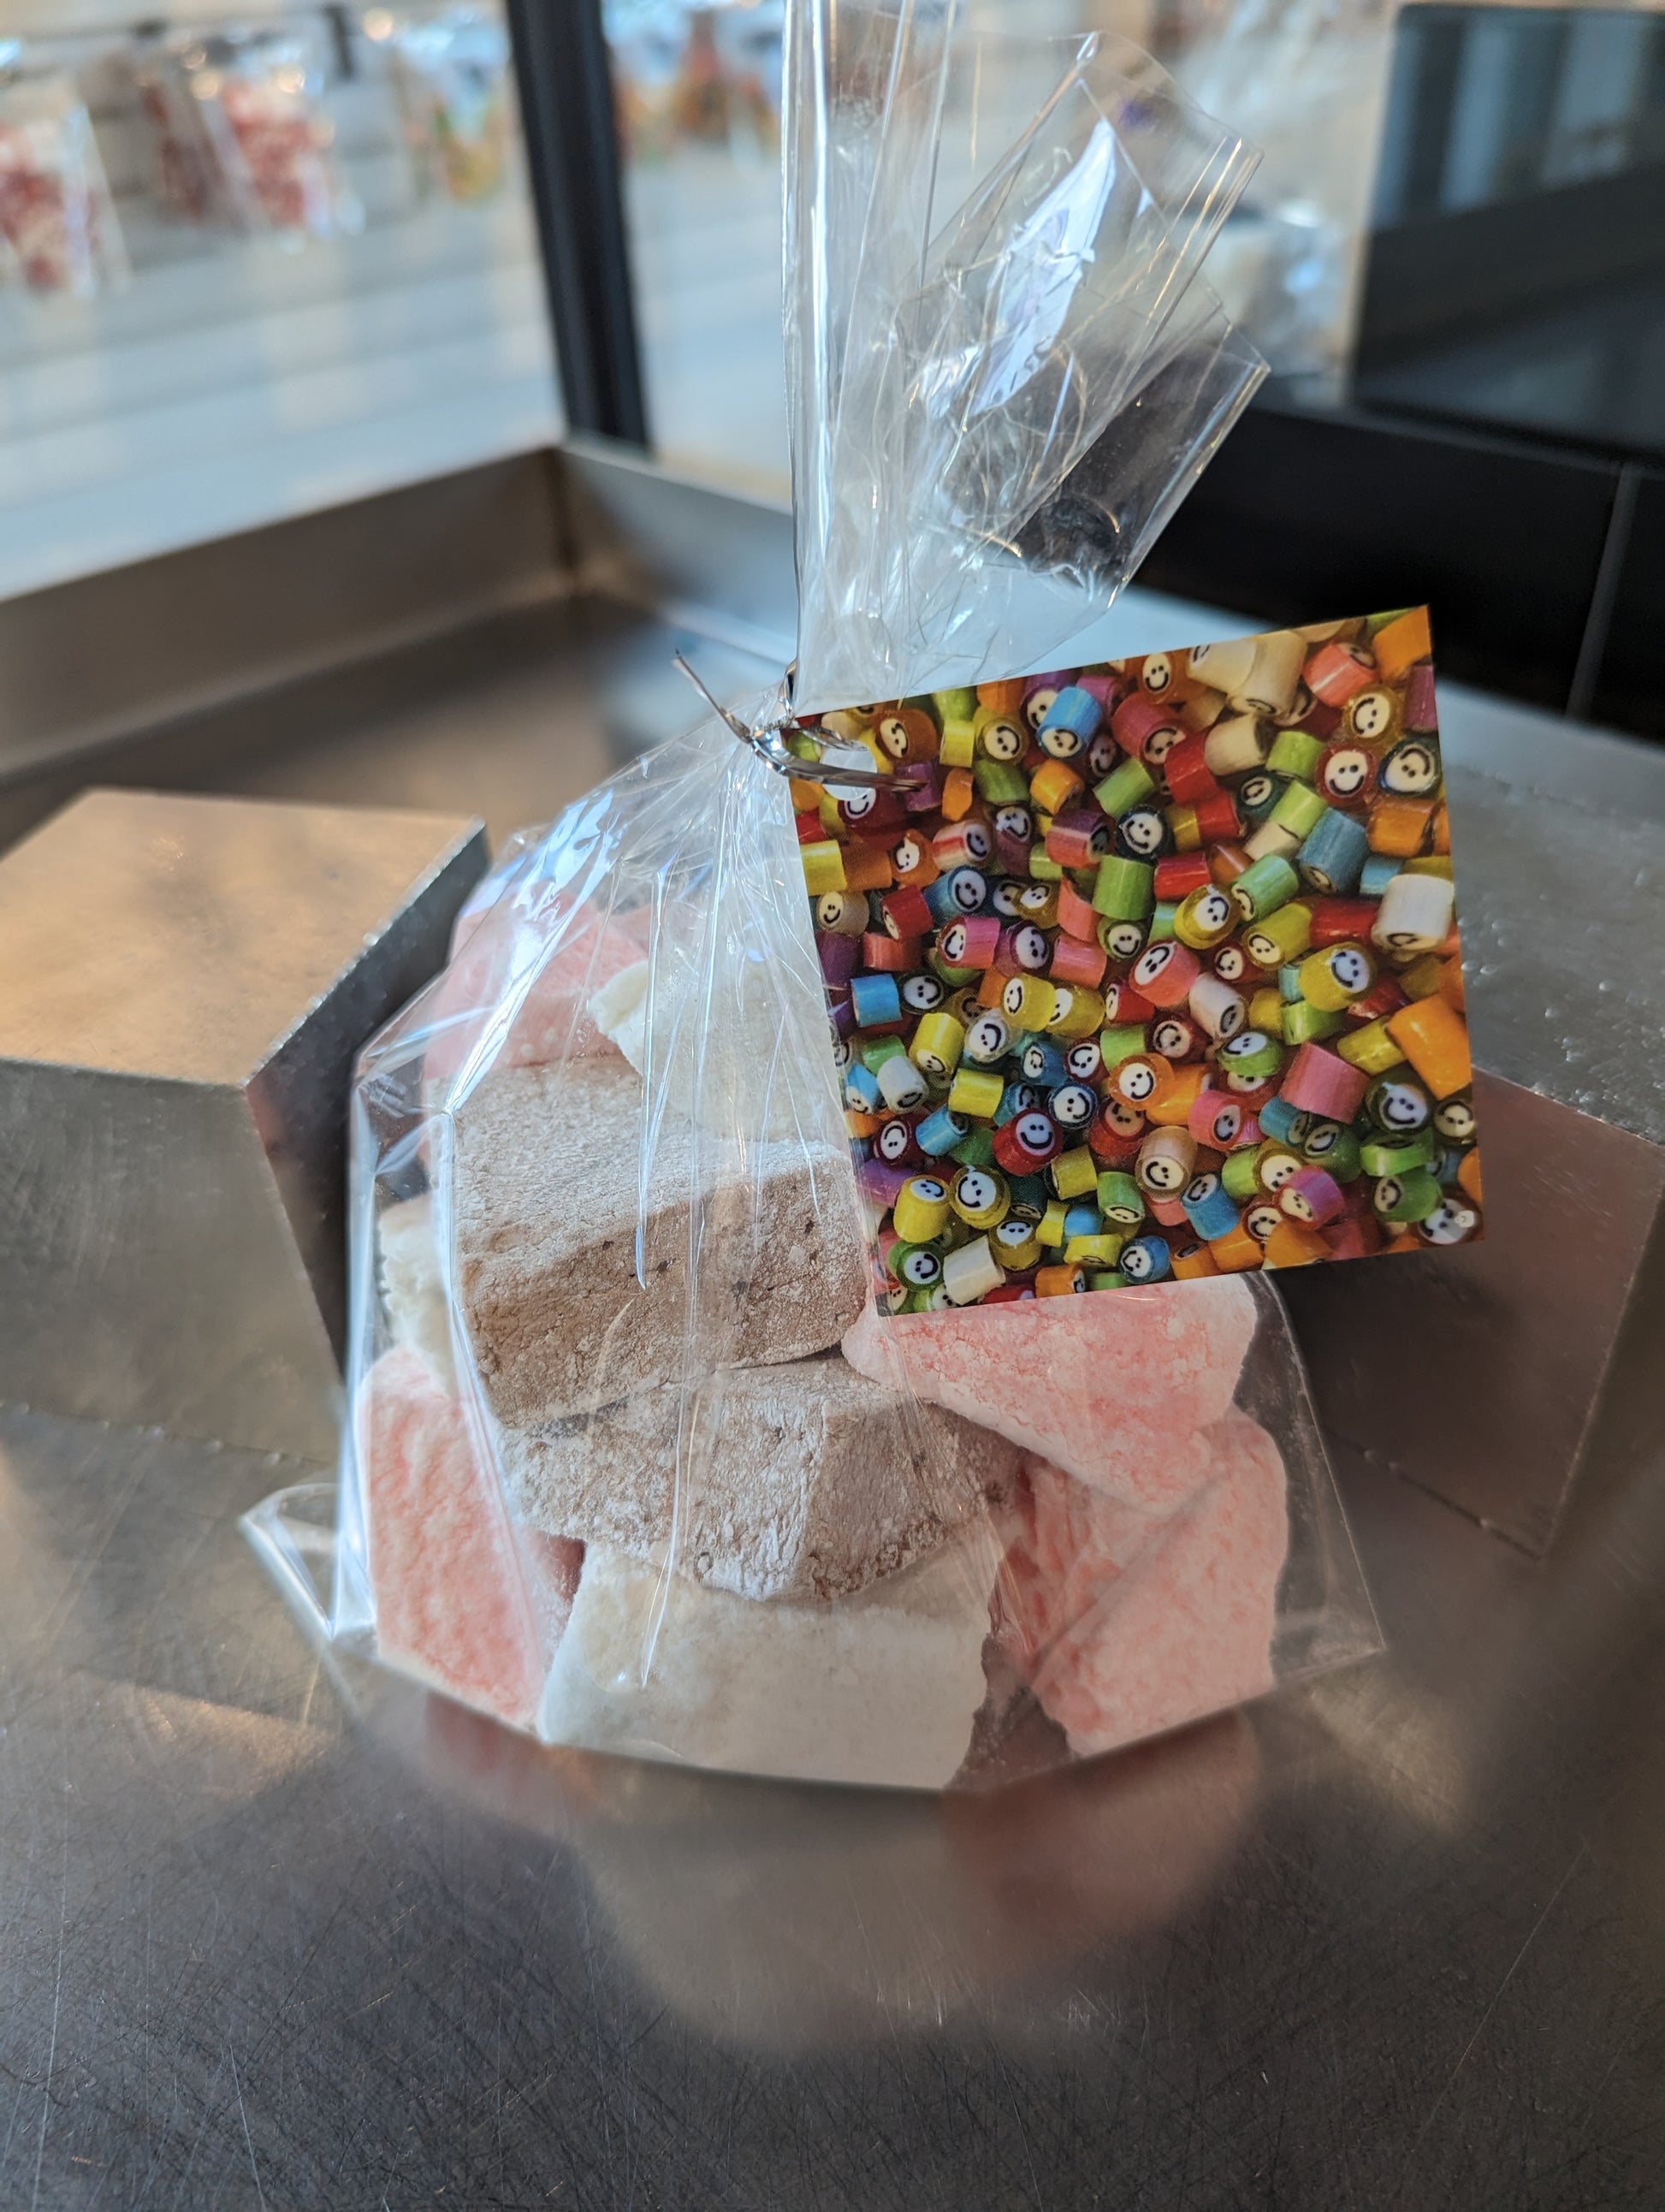 Guests can watch candy-making process at new sweets shop on Studewood  Street